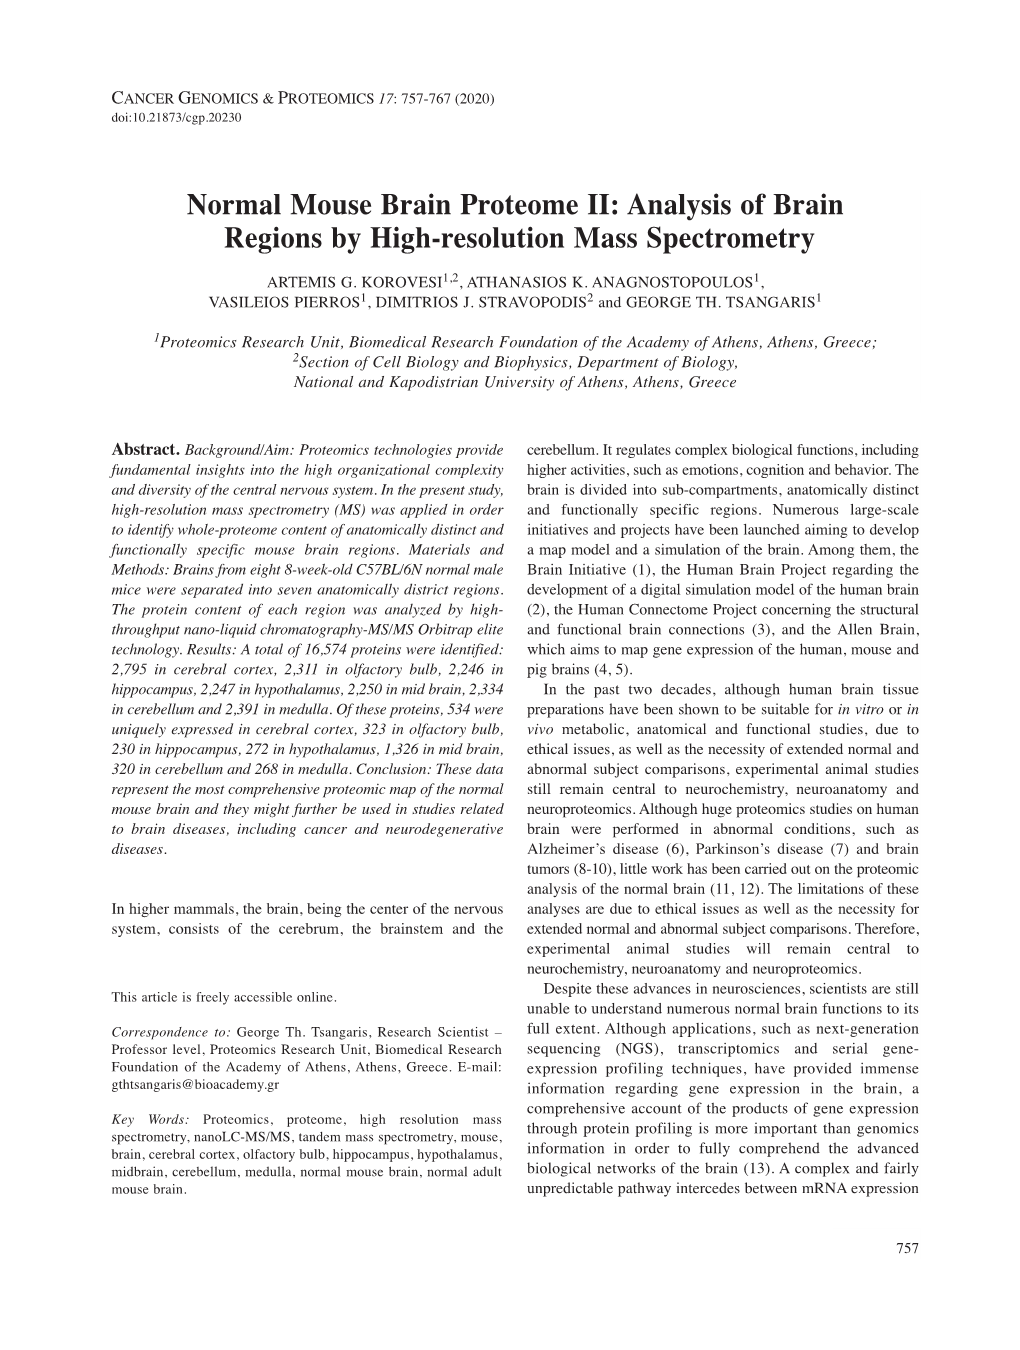 Normal Mouse Brain Proteome II: Analysis of Brain Regions by High-Resolution Mass Spectrometry ARTEMIS G